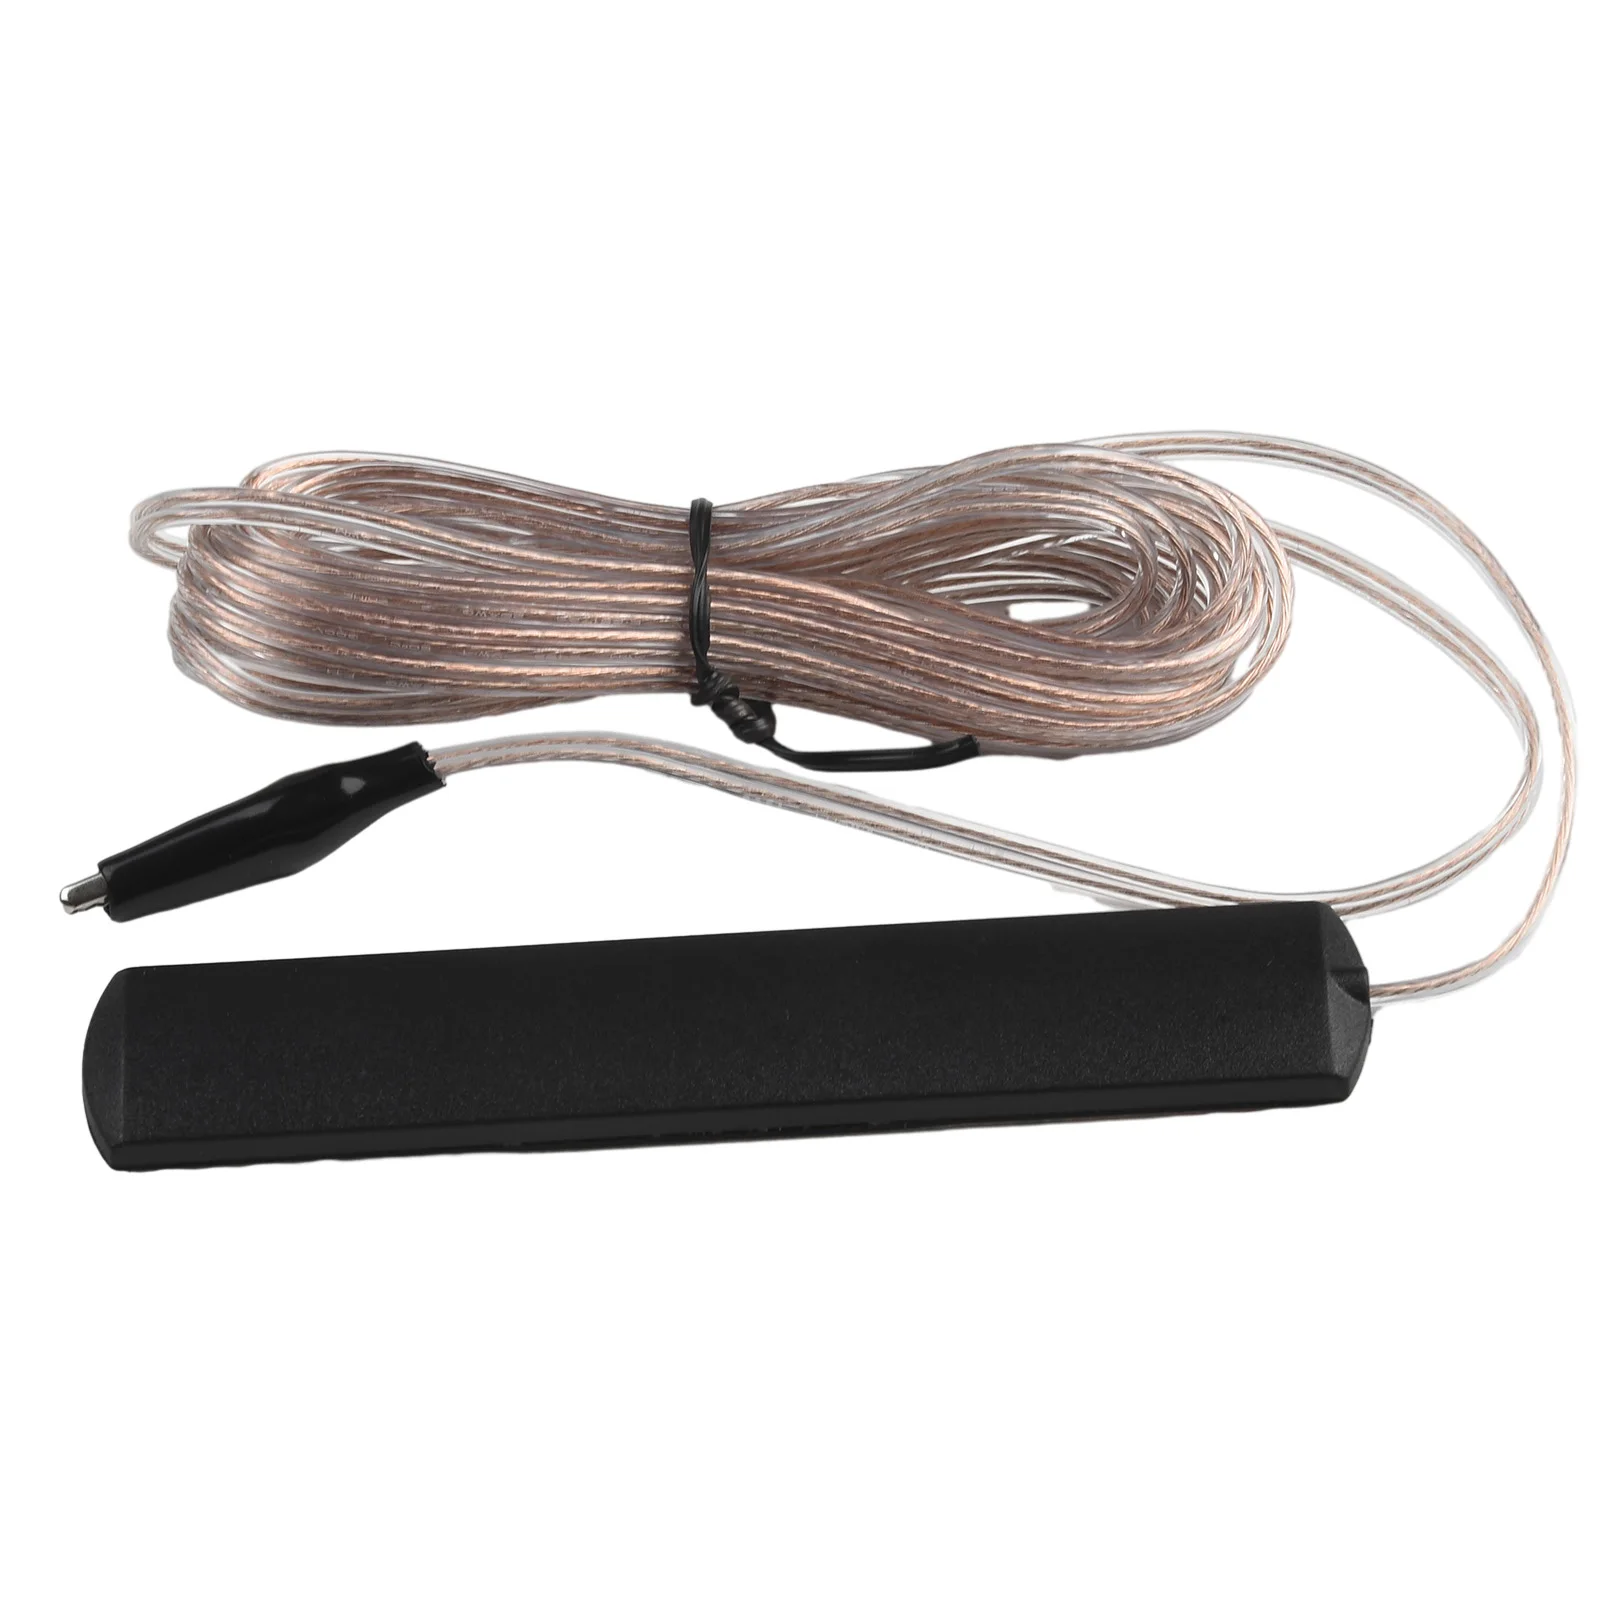 

Clip On Radio FM Stereo Antenna Indoor Length 5m Stable Transfer Wide Compatible 85-112MHz Alligator Connector